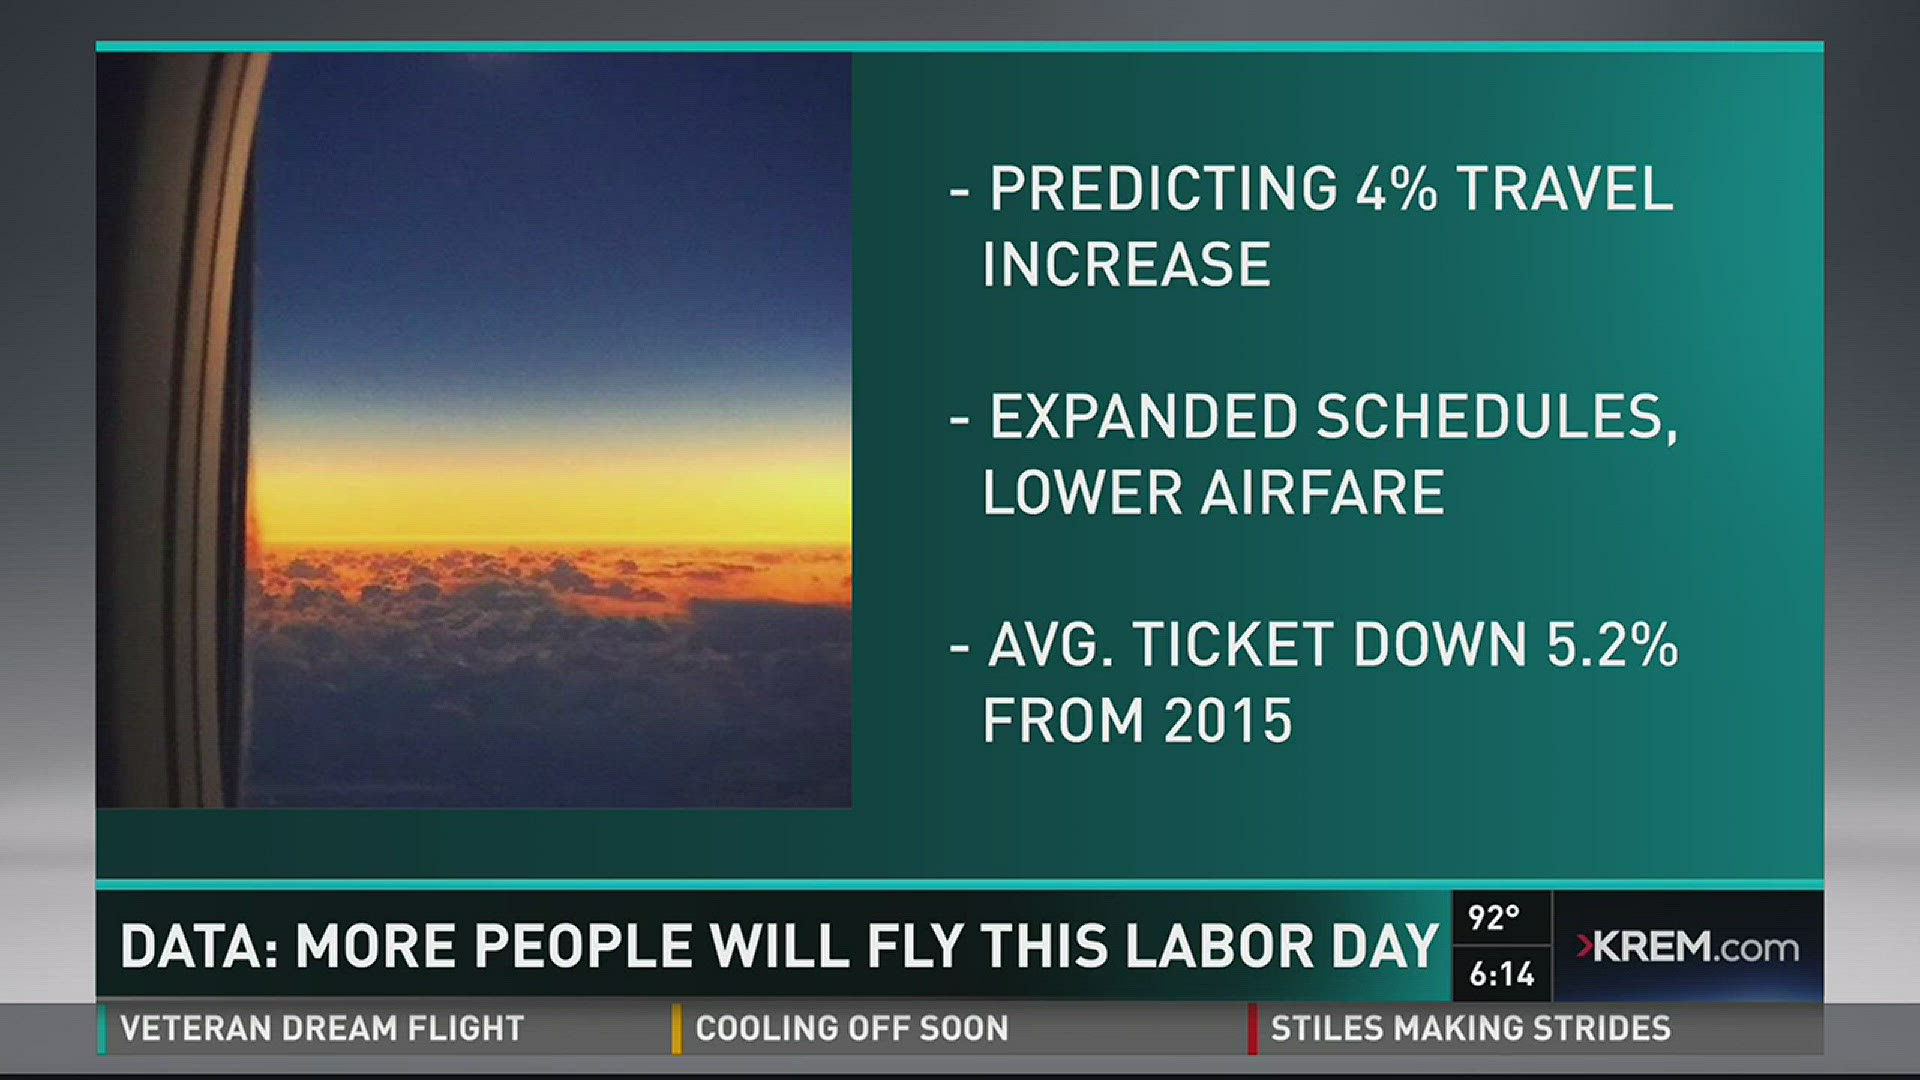 A new prediction for Labor Day says there will be more people flying this holiday compared to last year.